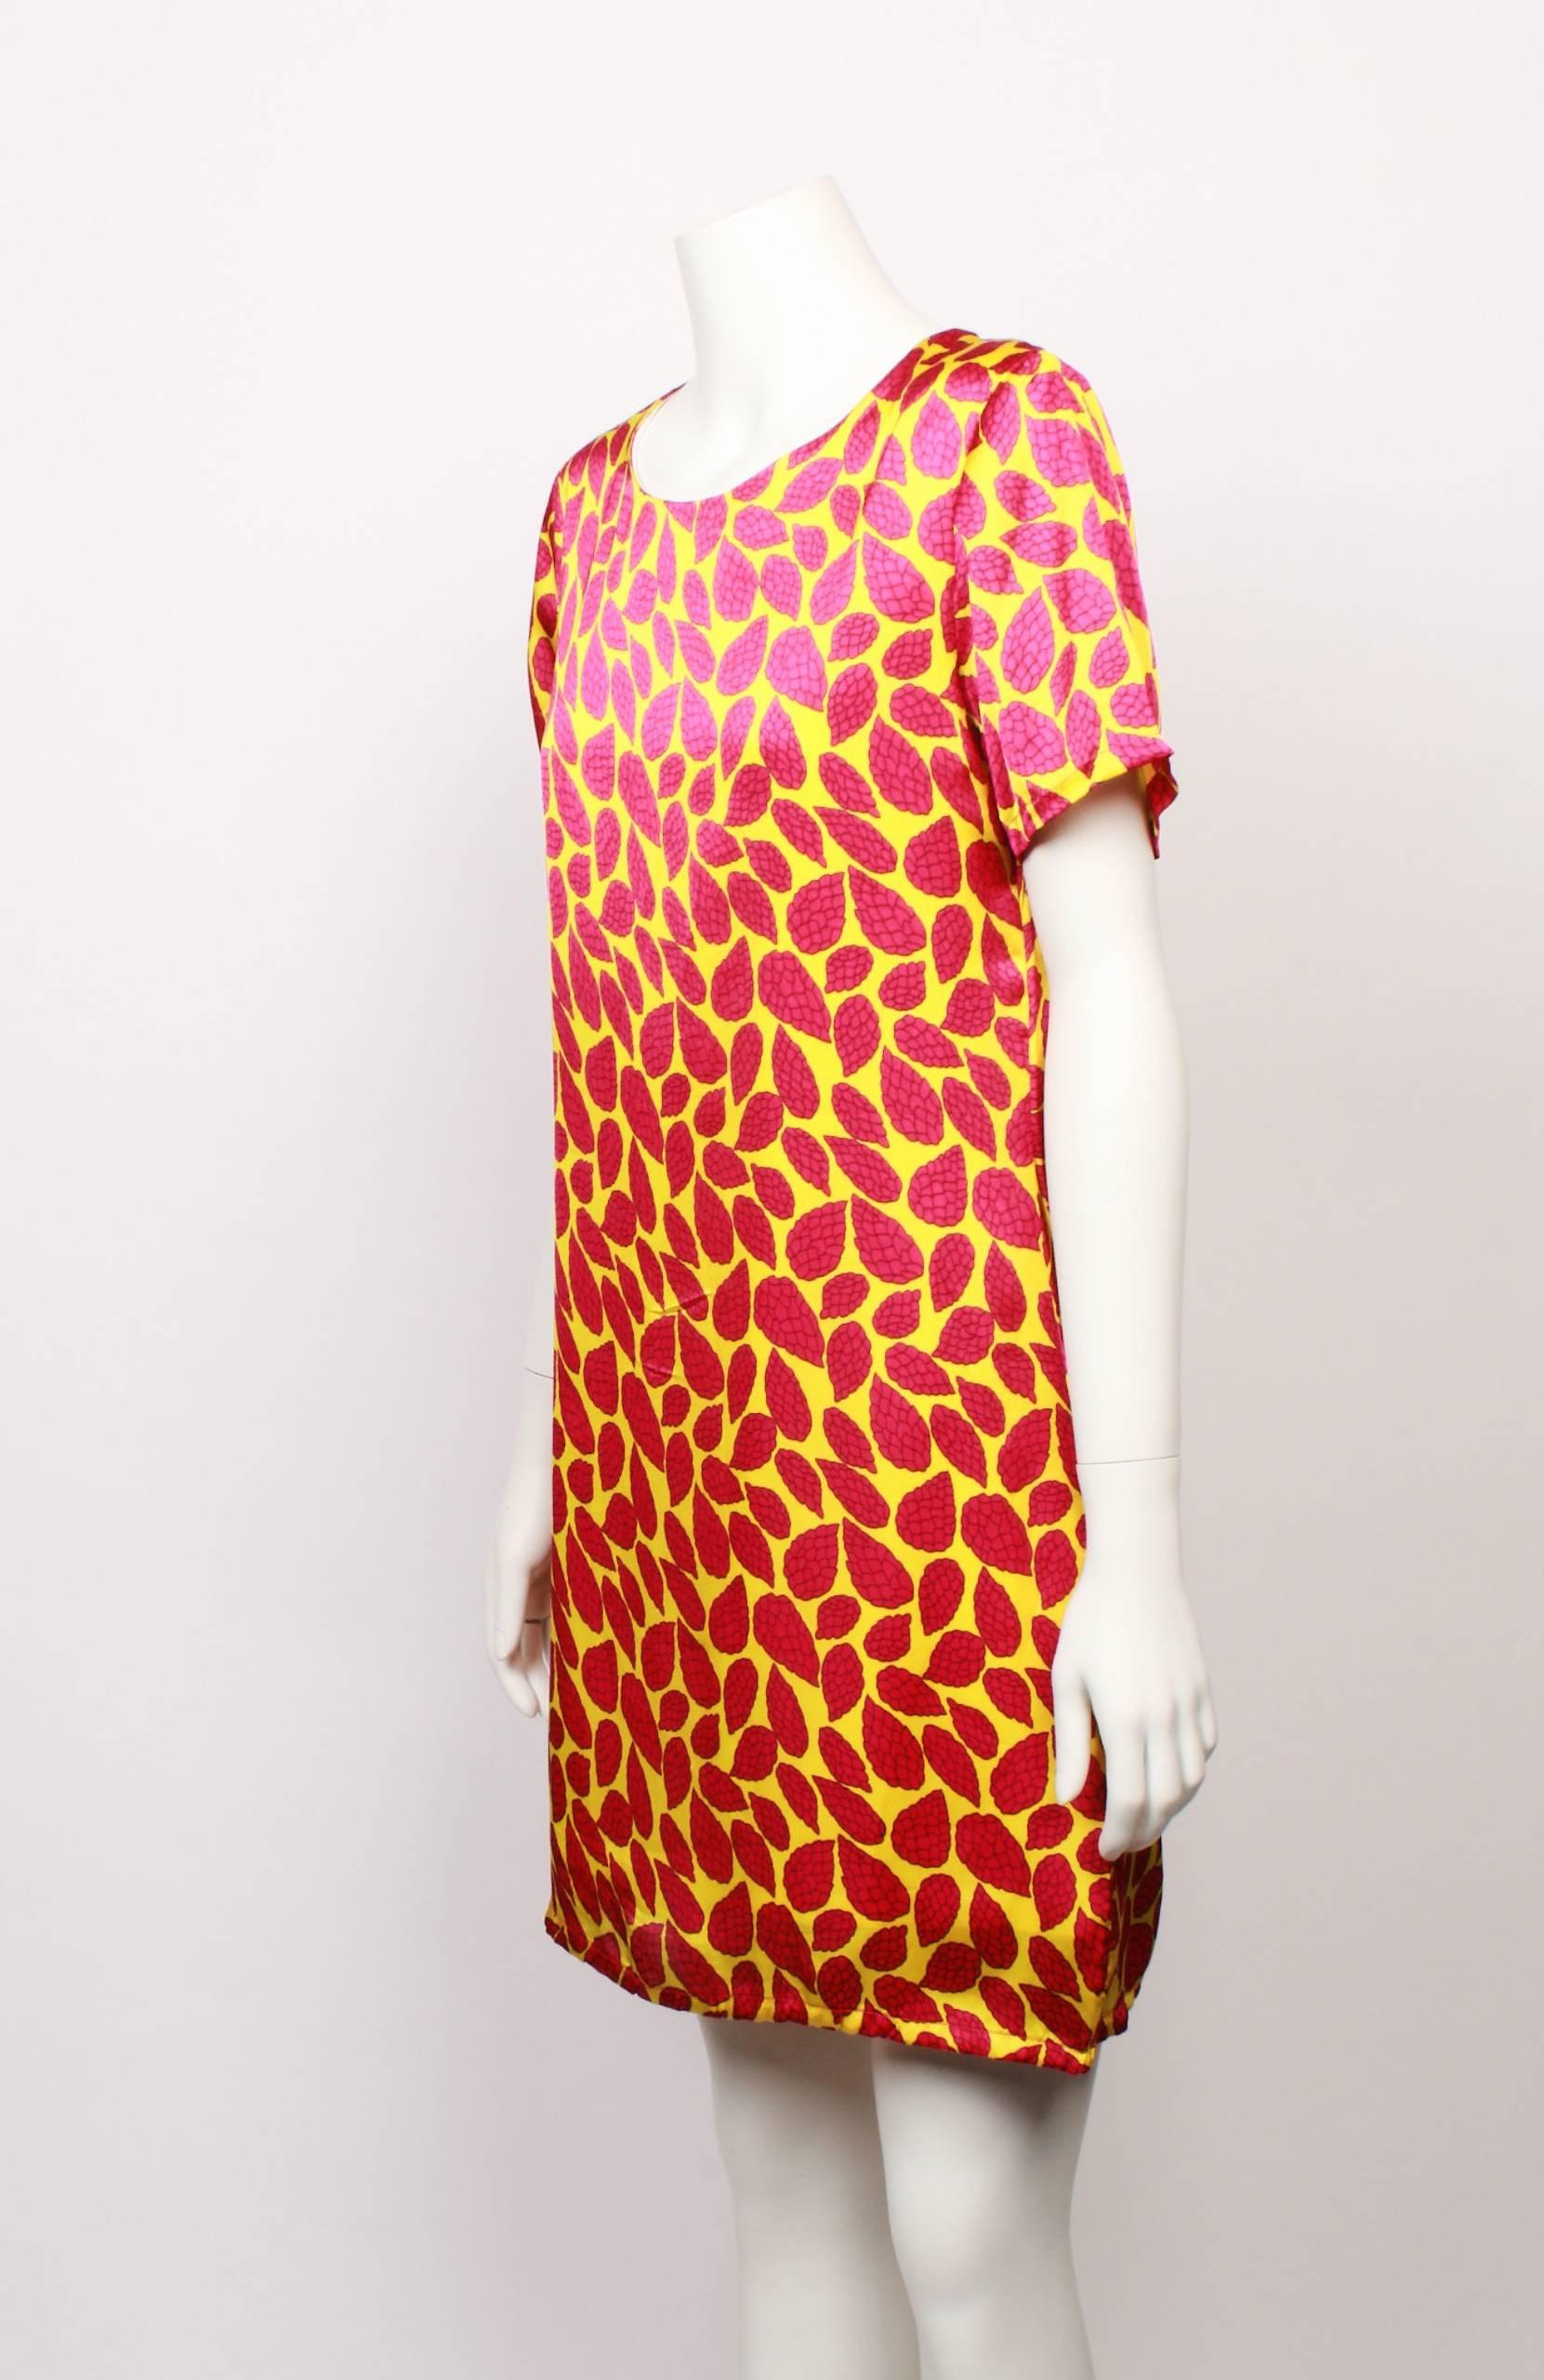 Love Moschino 100% pure silk shift dress . The print has a bright yellow base with a bright fuschia leaf design. Fully lined with feature black and nickel zipper closure. Original swing tag is attached. 